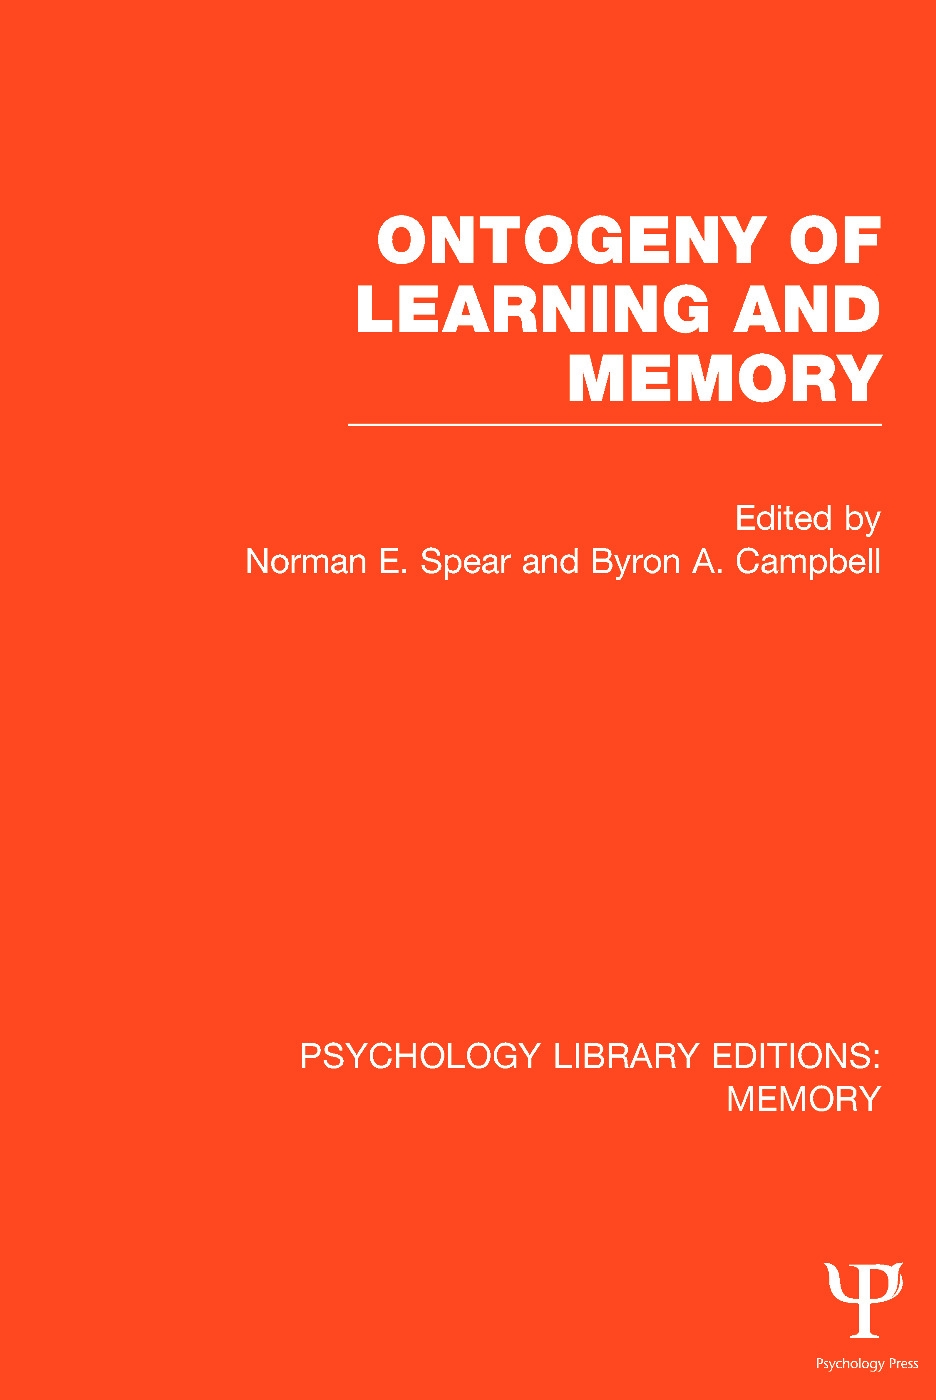 Ontogeny of Learning and Memory (Ple: Memory)